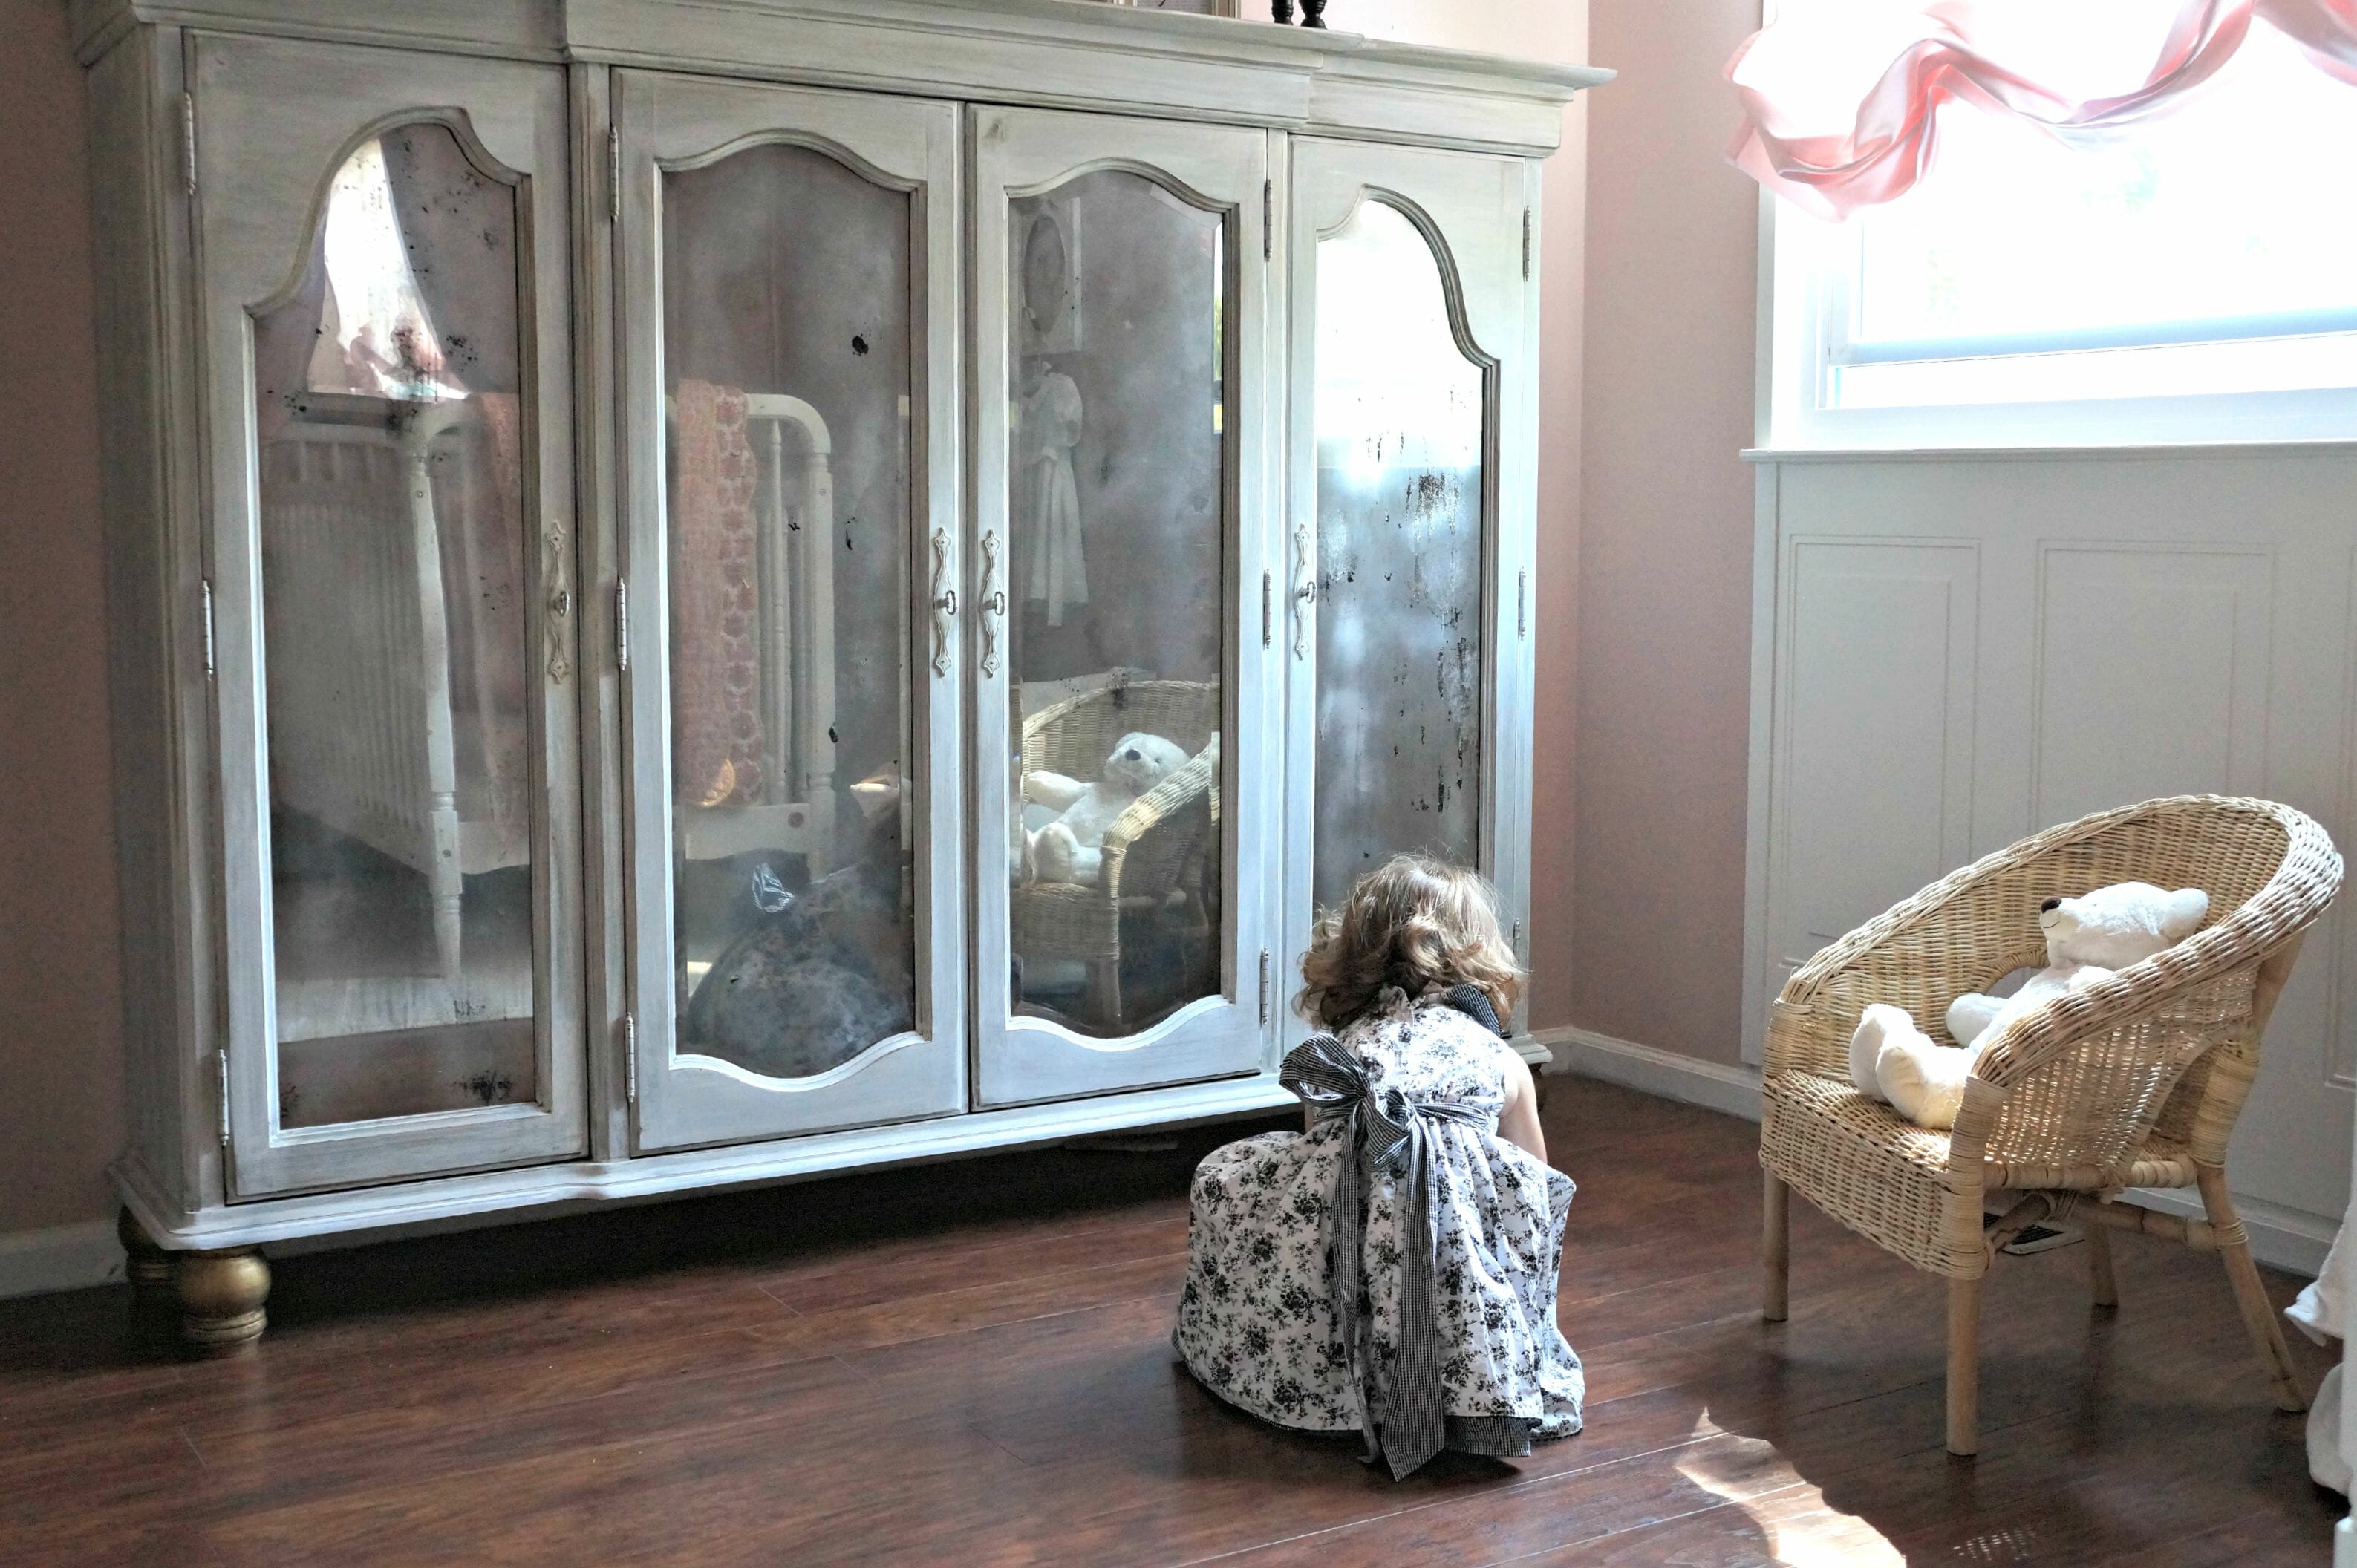 Chalk Painted Buffet Makeover (RH Inspired)